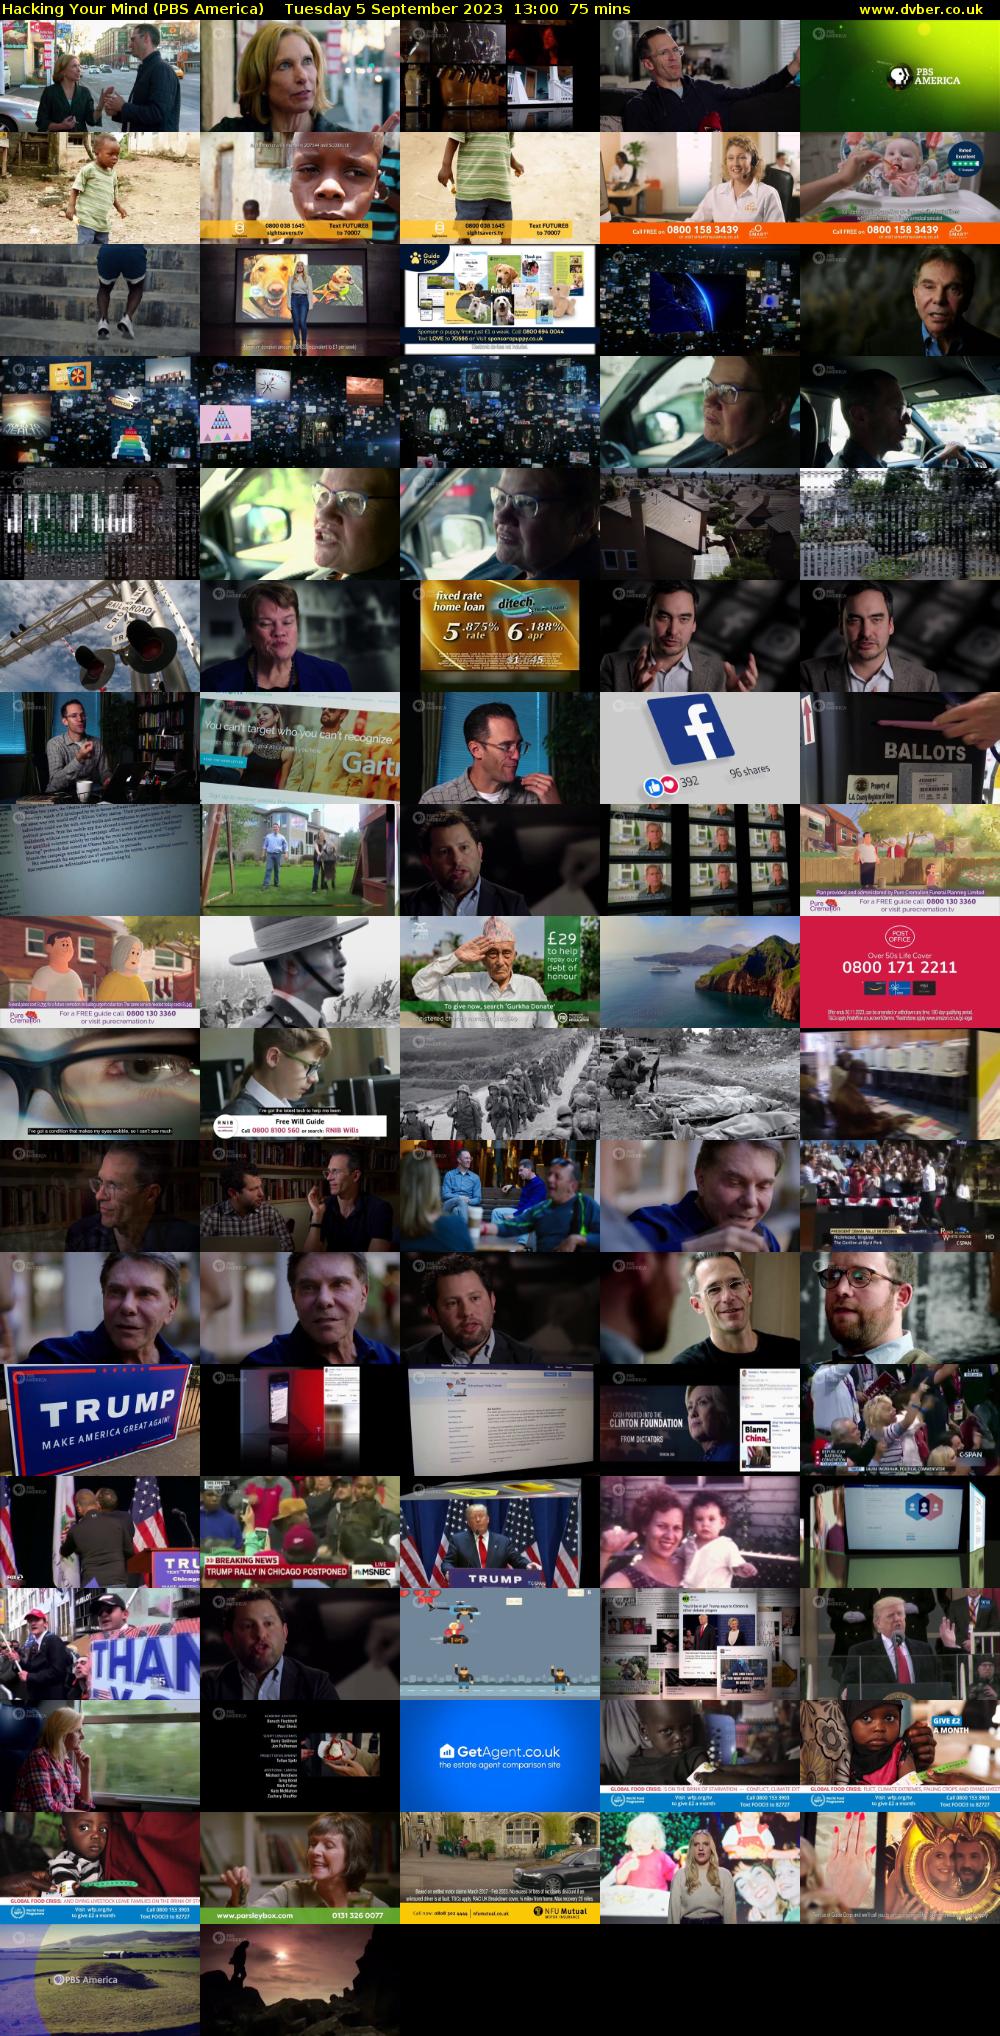 Hacking Your Mind (PBS America) Tuesday 5 September 2023 13:00 - 14:15